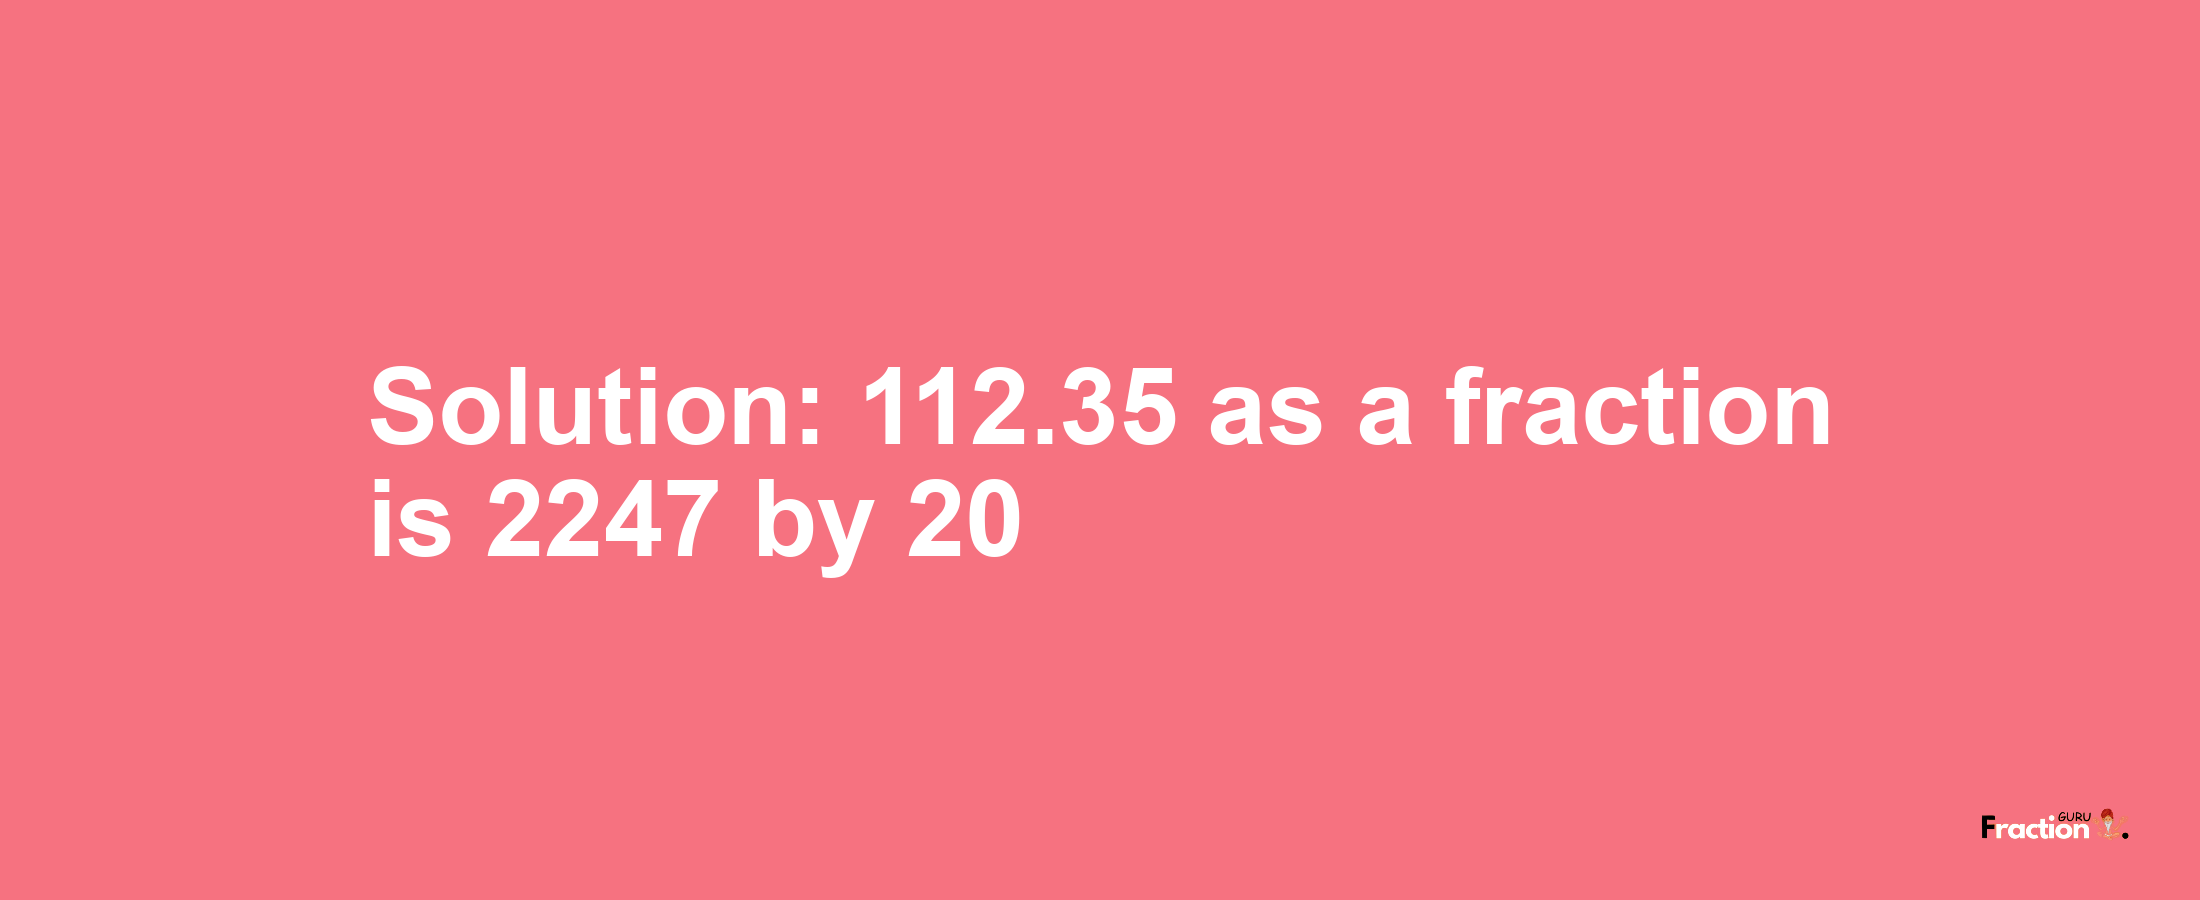 Solution:112.35 as a fraction is 2247/20